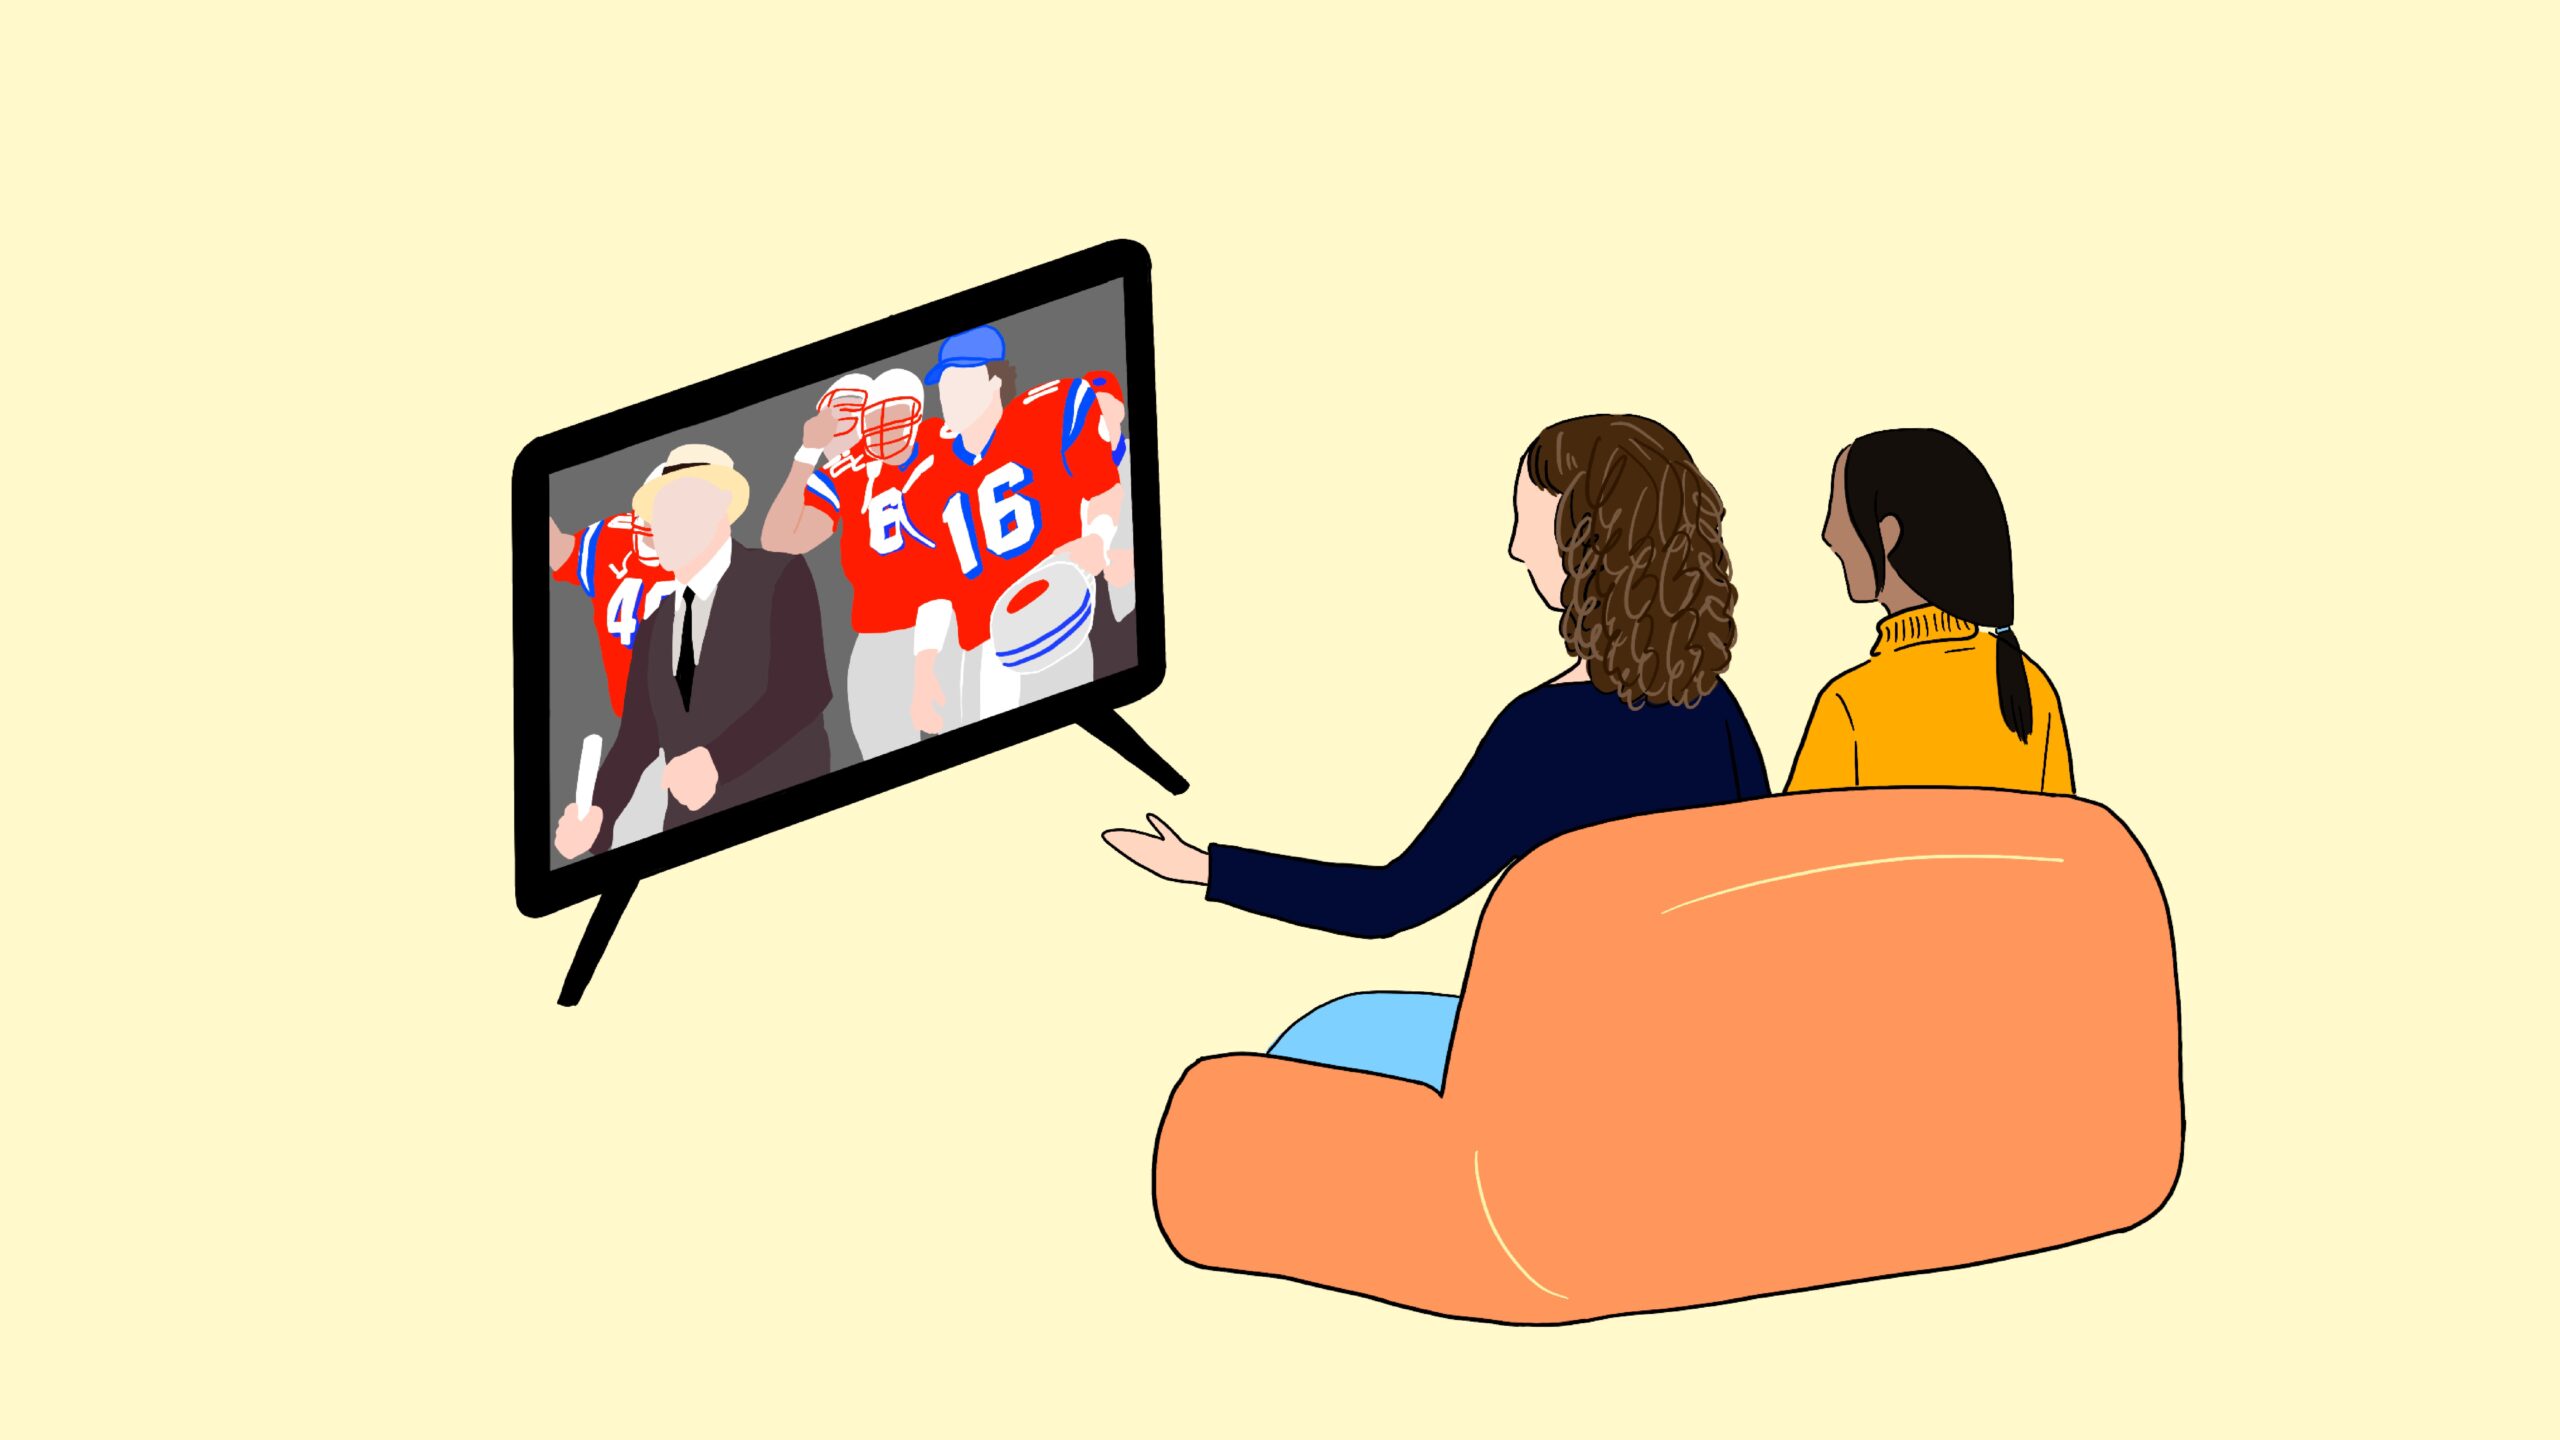 Illustration of two people watching sports movies together on a couch.